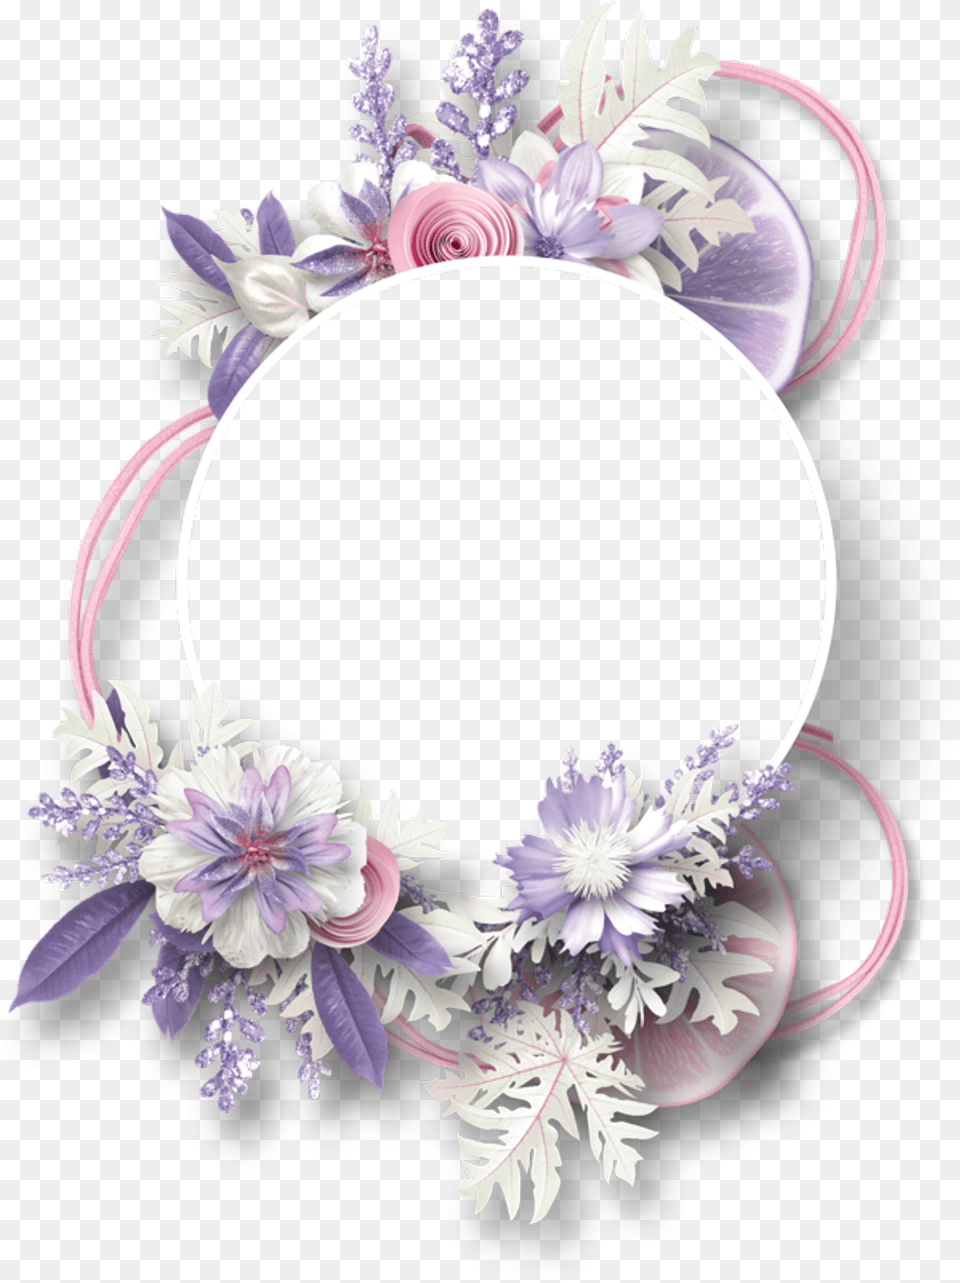 Floral Border Borders And Frames Borders Free Flower Purple Flower Border, Accessories, Plant, Jewelry Png